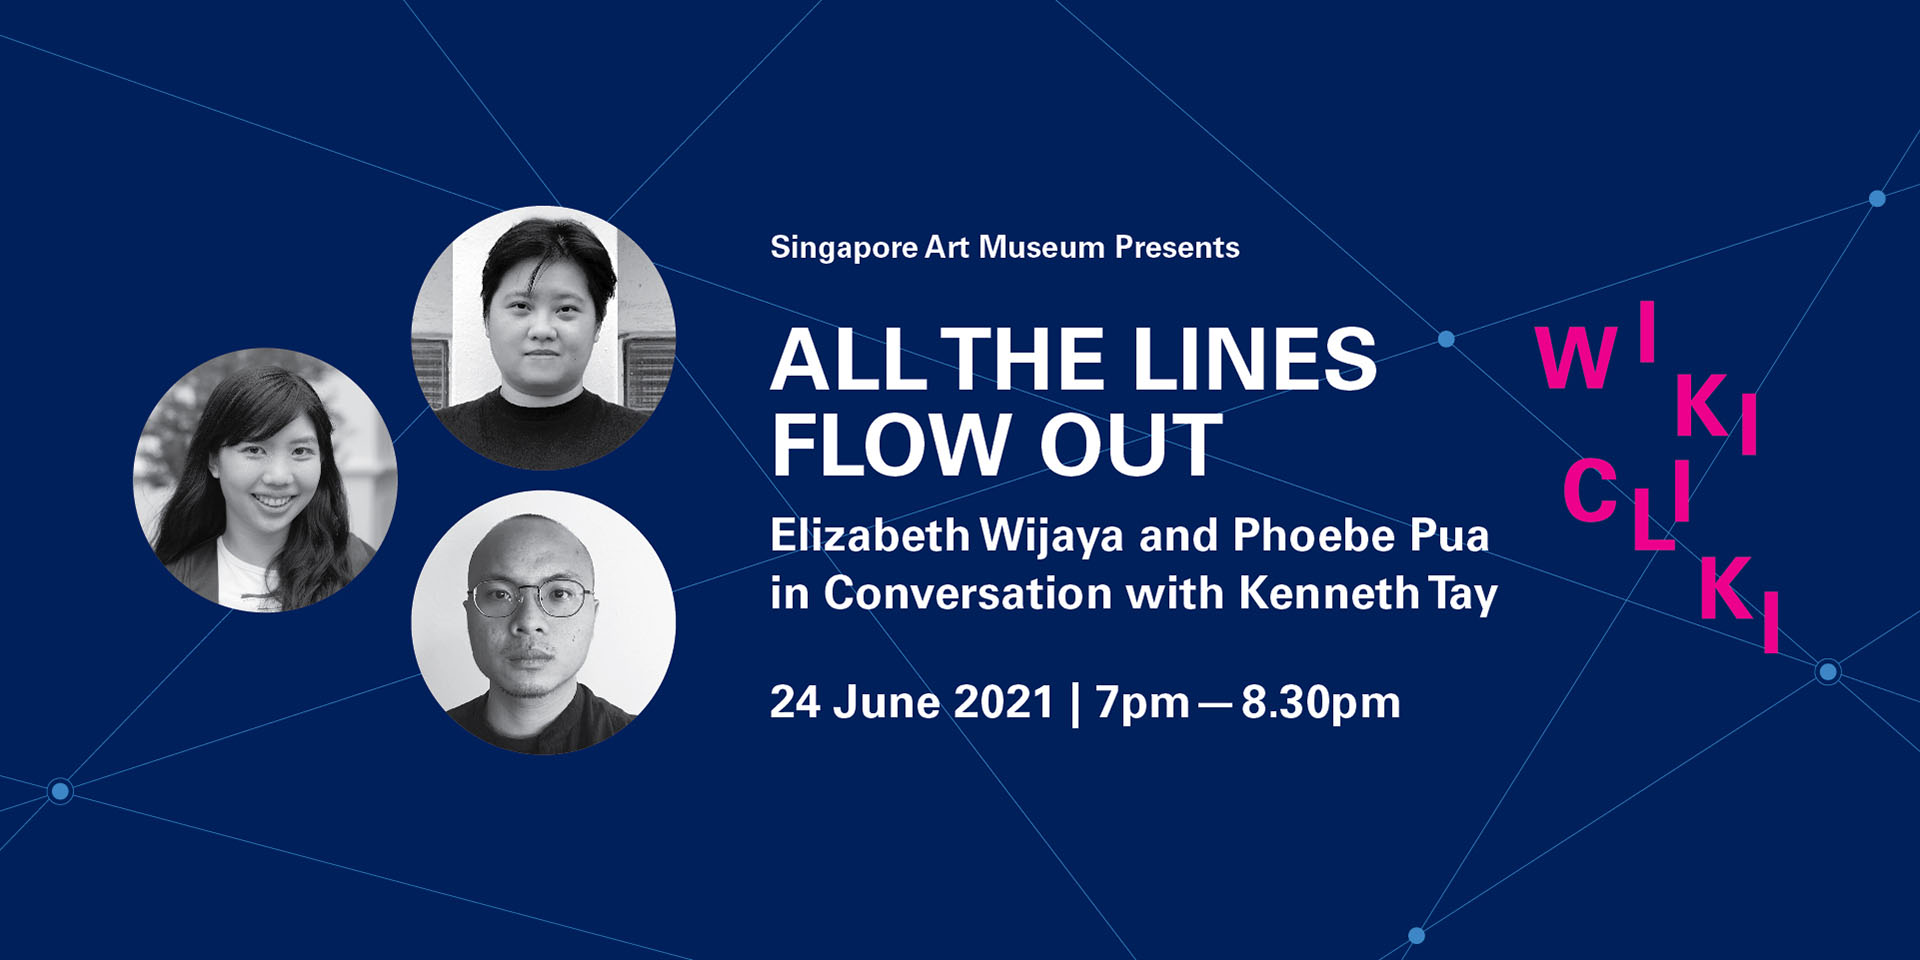 All the Lines Flow Out: Elizabeth Wijaya and Phoebe Pua in Conversation with Kenneth Tay